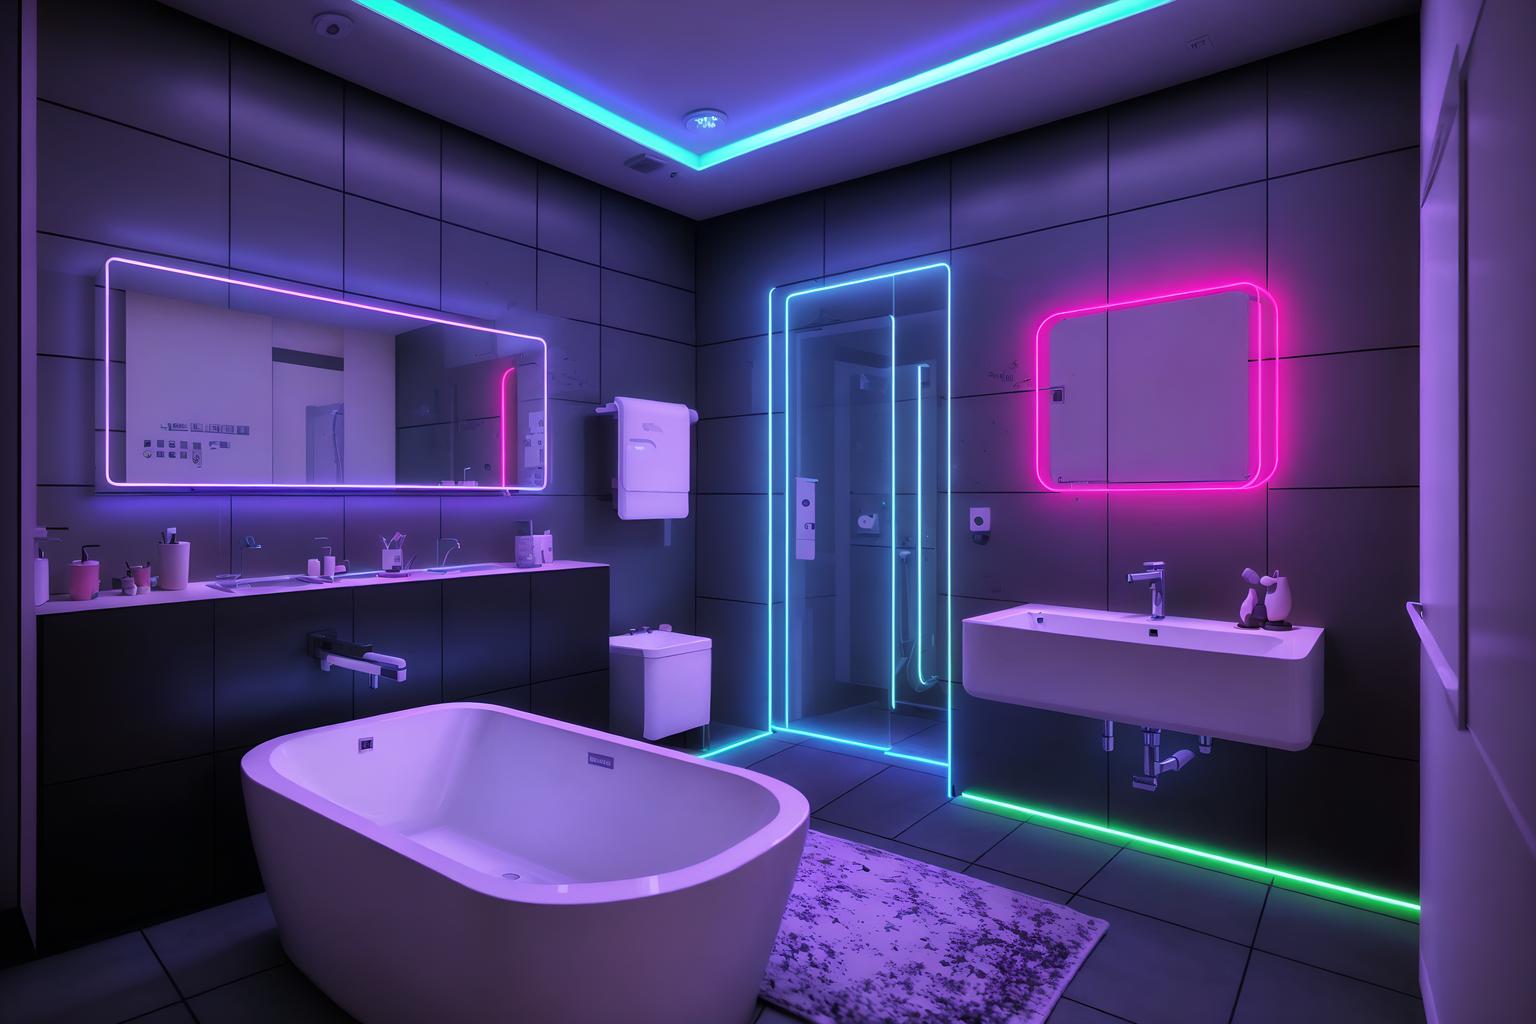 gaming room-style (hotel bathroom interior) with bathroom sink with faucet and toilet seat and waste basket and bath rail and bathtub and shower and bathroom cabinet and plant. . with at night and dark walls and neon letters on wall and purple, red and blue fade light and computer desk with computer displays and keyboard and neon lights and speakers and dark room. . cinematic photo, highly detailed, cinematic lighting, ultra-detailed, ultrarealistic, photorealism, 8k. gaming room interior design style. masterpiece, cinematic light, ultrarealistic+, photorealistic+, 8k, raw photo, realistic, sharp focus on eyes, (symmetrical eyes), (intact eyes), hyperrealistic, highest quality, best quality, , highly detailed, masterpiece, best quality, extremely detailed 8k wallpaper, masterpiece, best quality, ultra-detailed, best shadow, detailed background, detailed face, detailed eyes, high contrast, best illumination, detailed face, dulux, caustic, dynamic angle, detailed glow. dramatic lighting. highly detailed, insanely detailed hair, symmetrical, intricate details, professionally retouched, 8k high definition. strong bokeh. award winning photo.